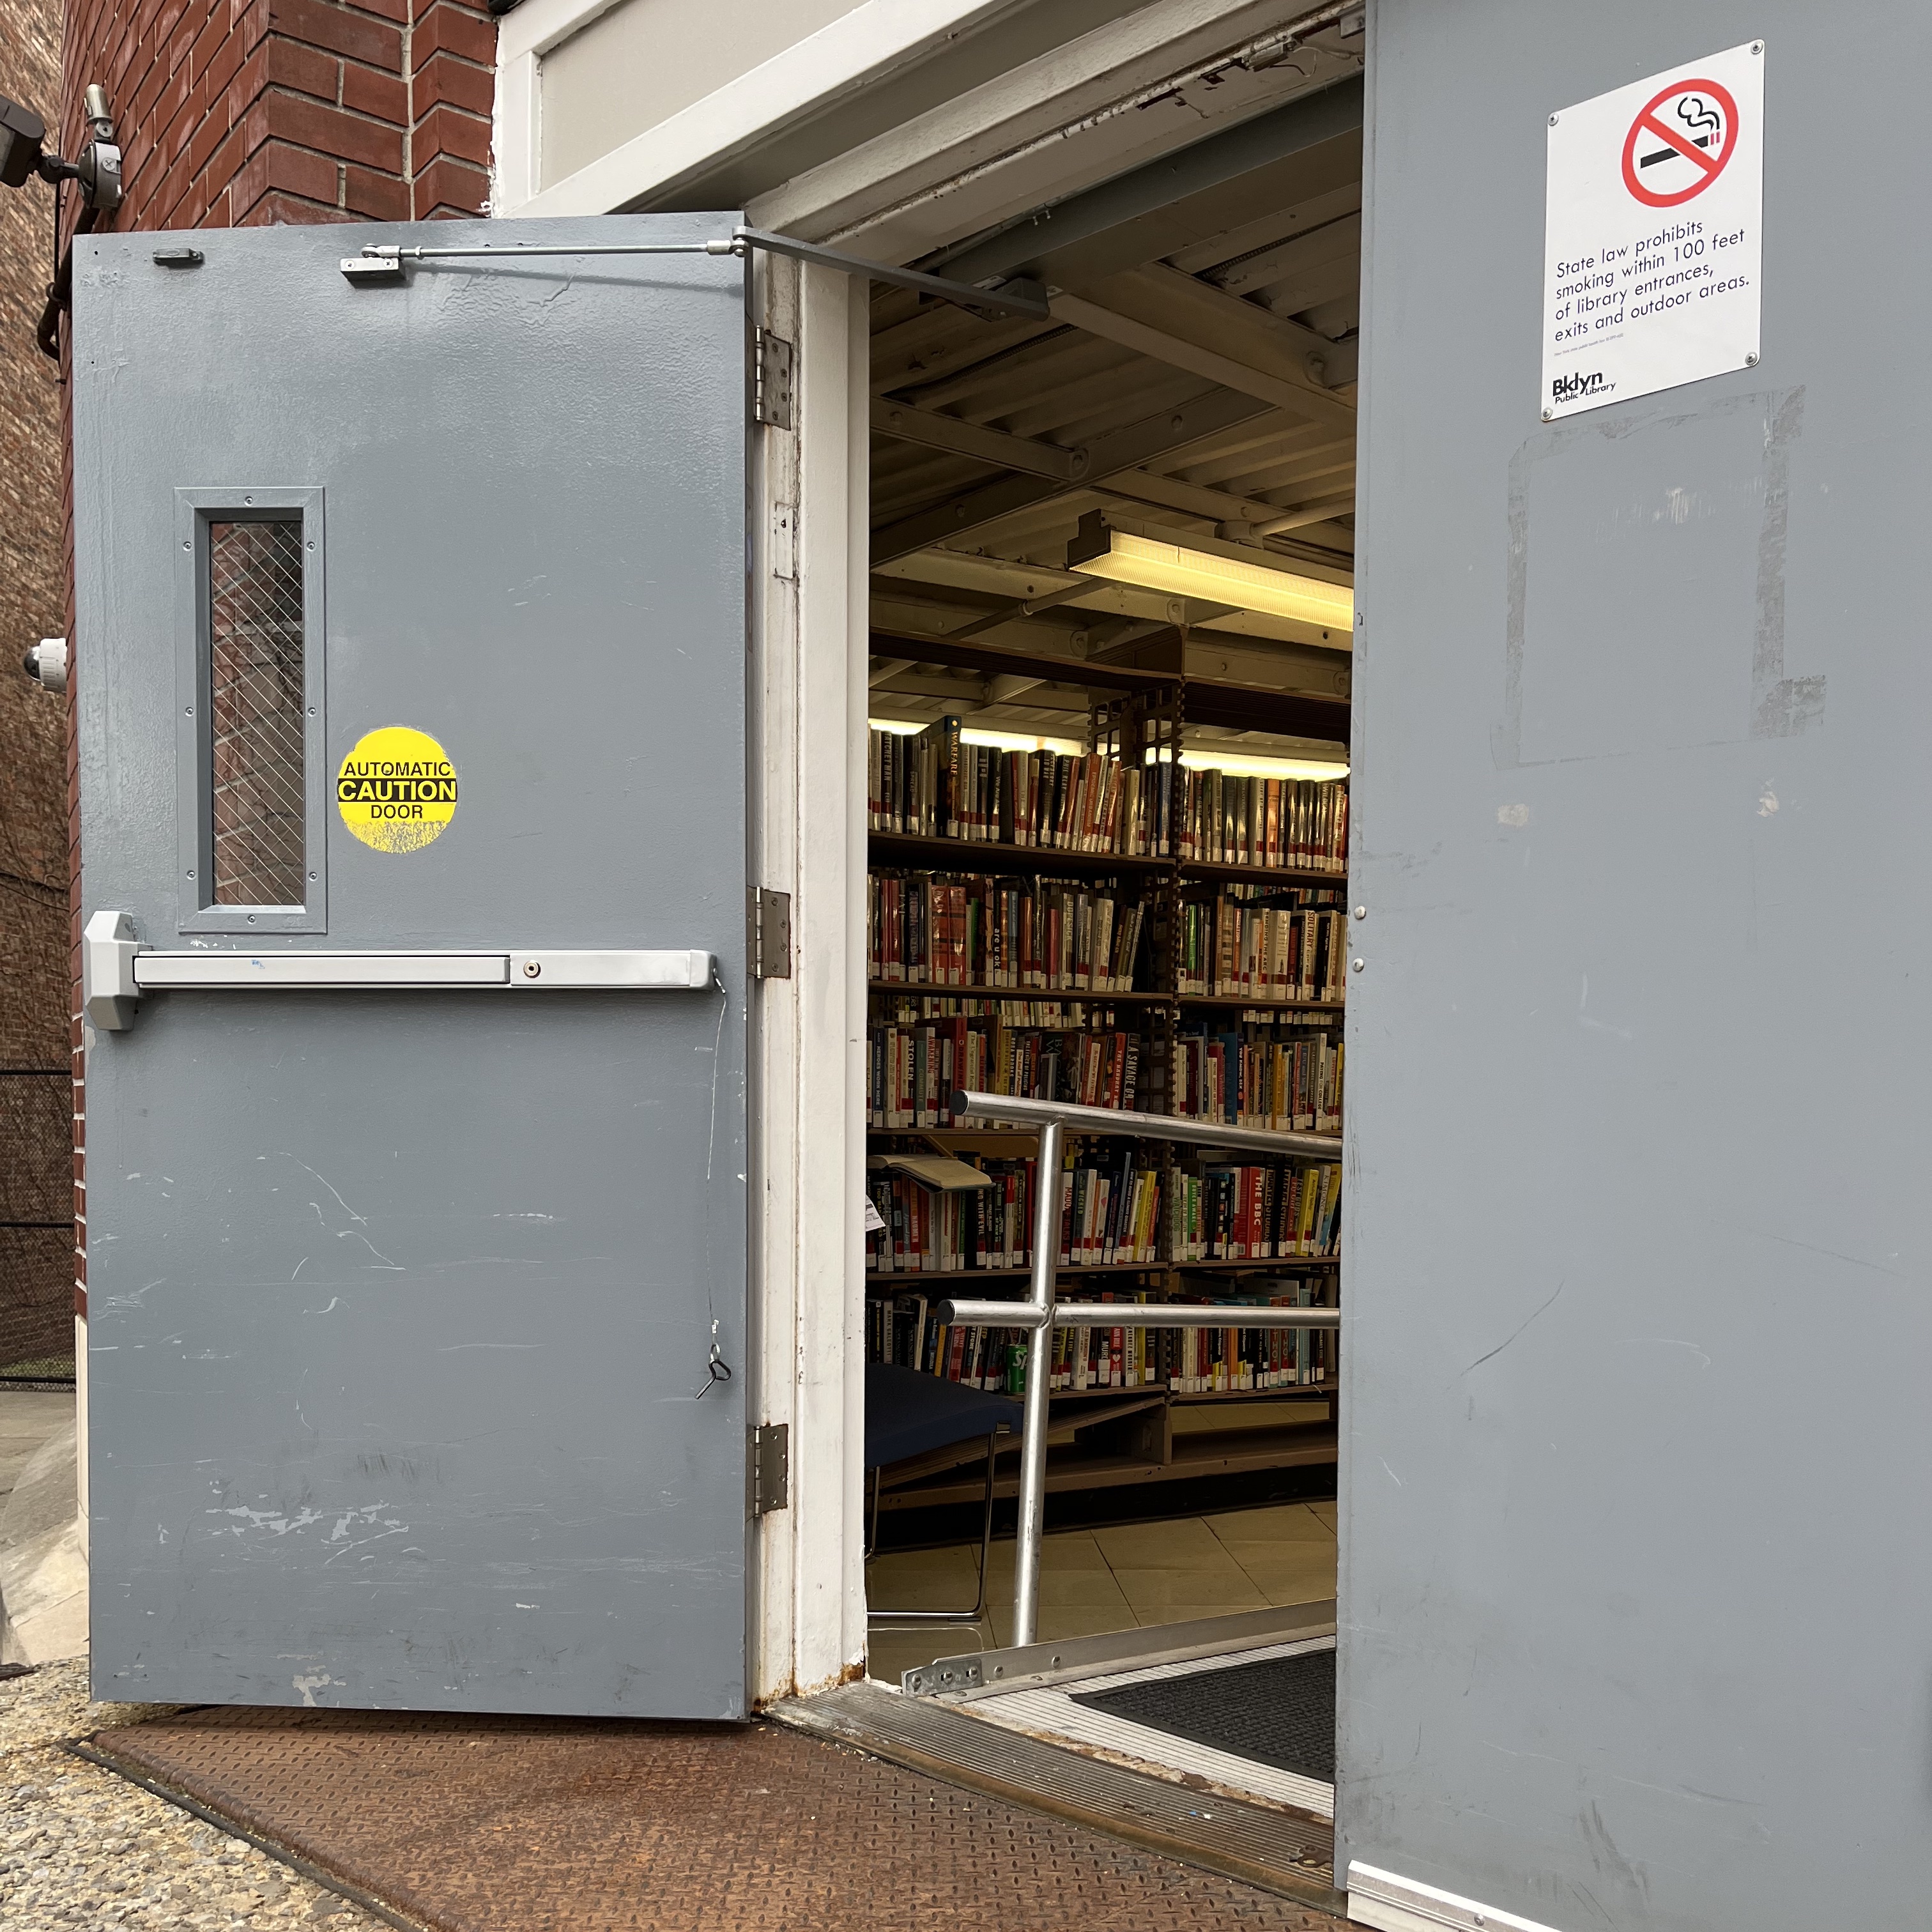 Back door of the Brooklyn Public Library branch on 4th Avenue, ajar.